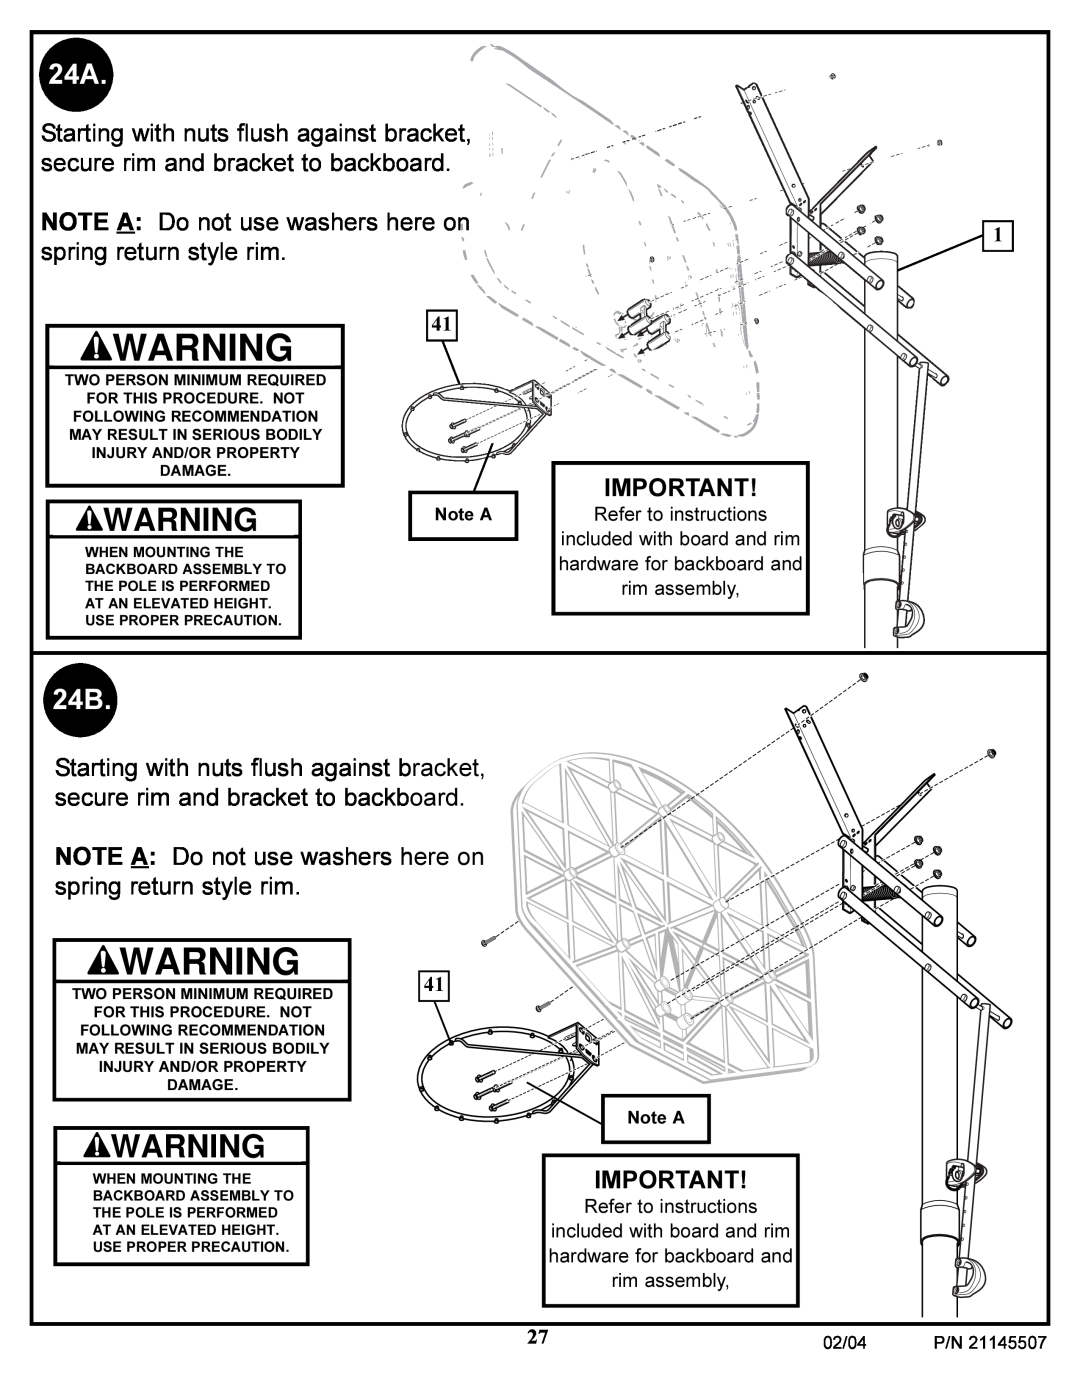 Huffy Sports Basketball Systems manual NOTE A Do not use washers here on spring return style rim, Note A, 02/04 